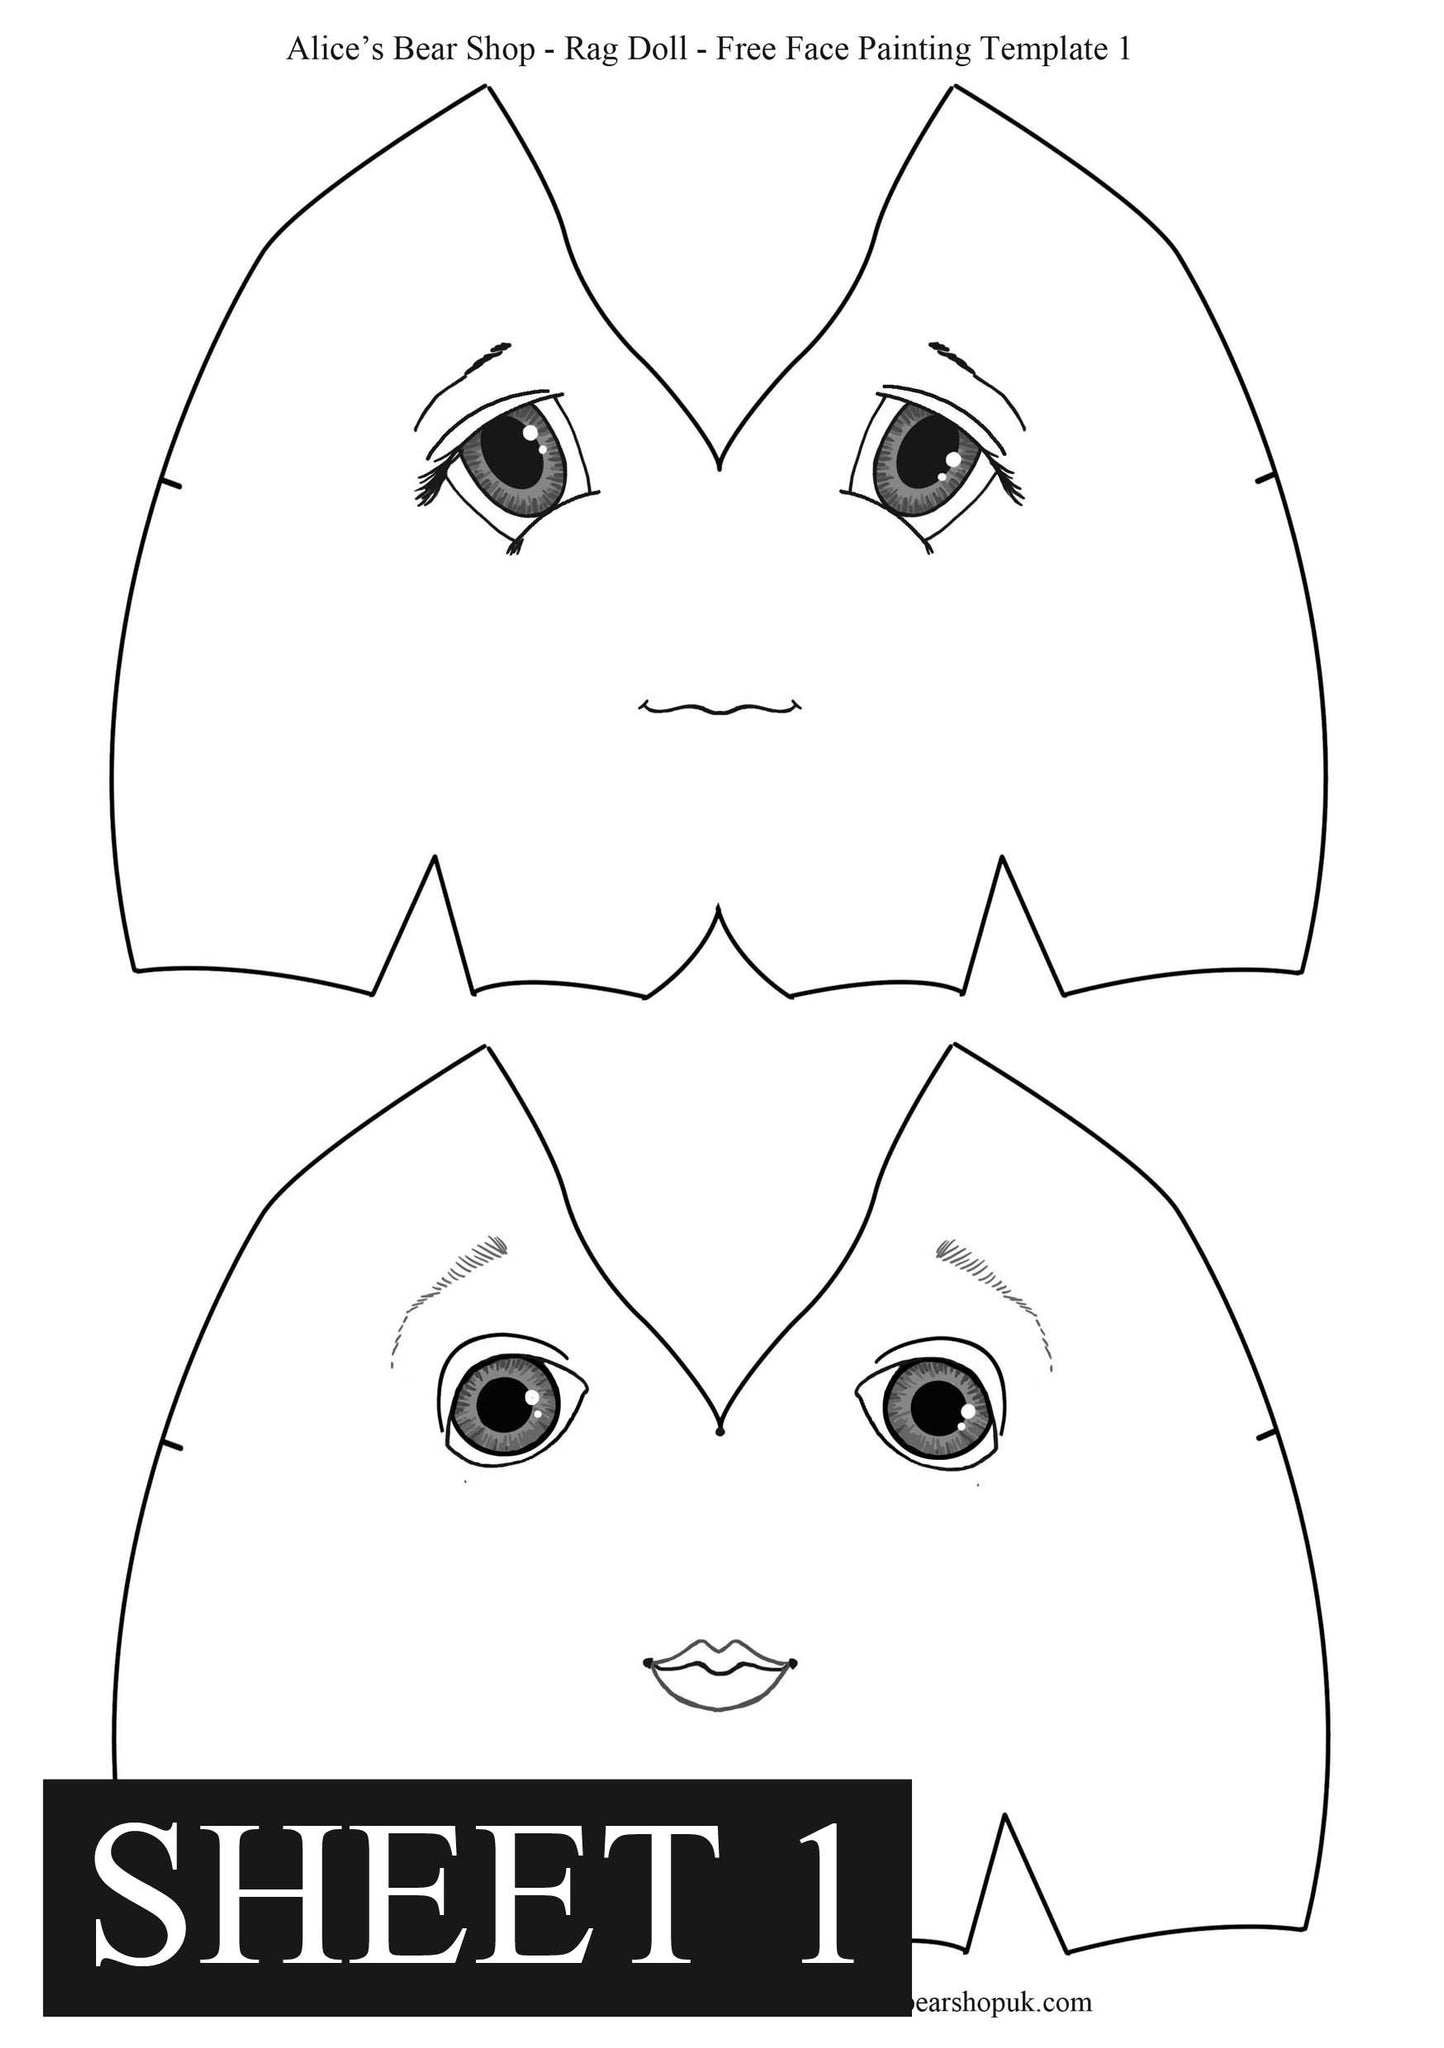 free-rag-doll-face-painting-a4-templates-alice-s-bear-shop